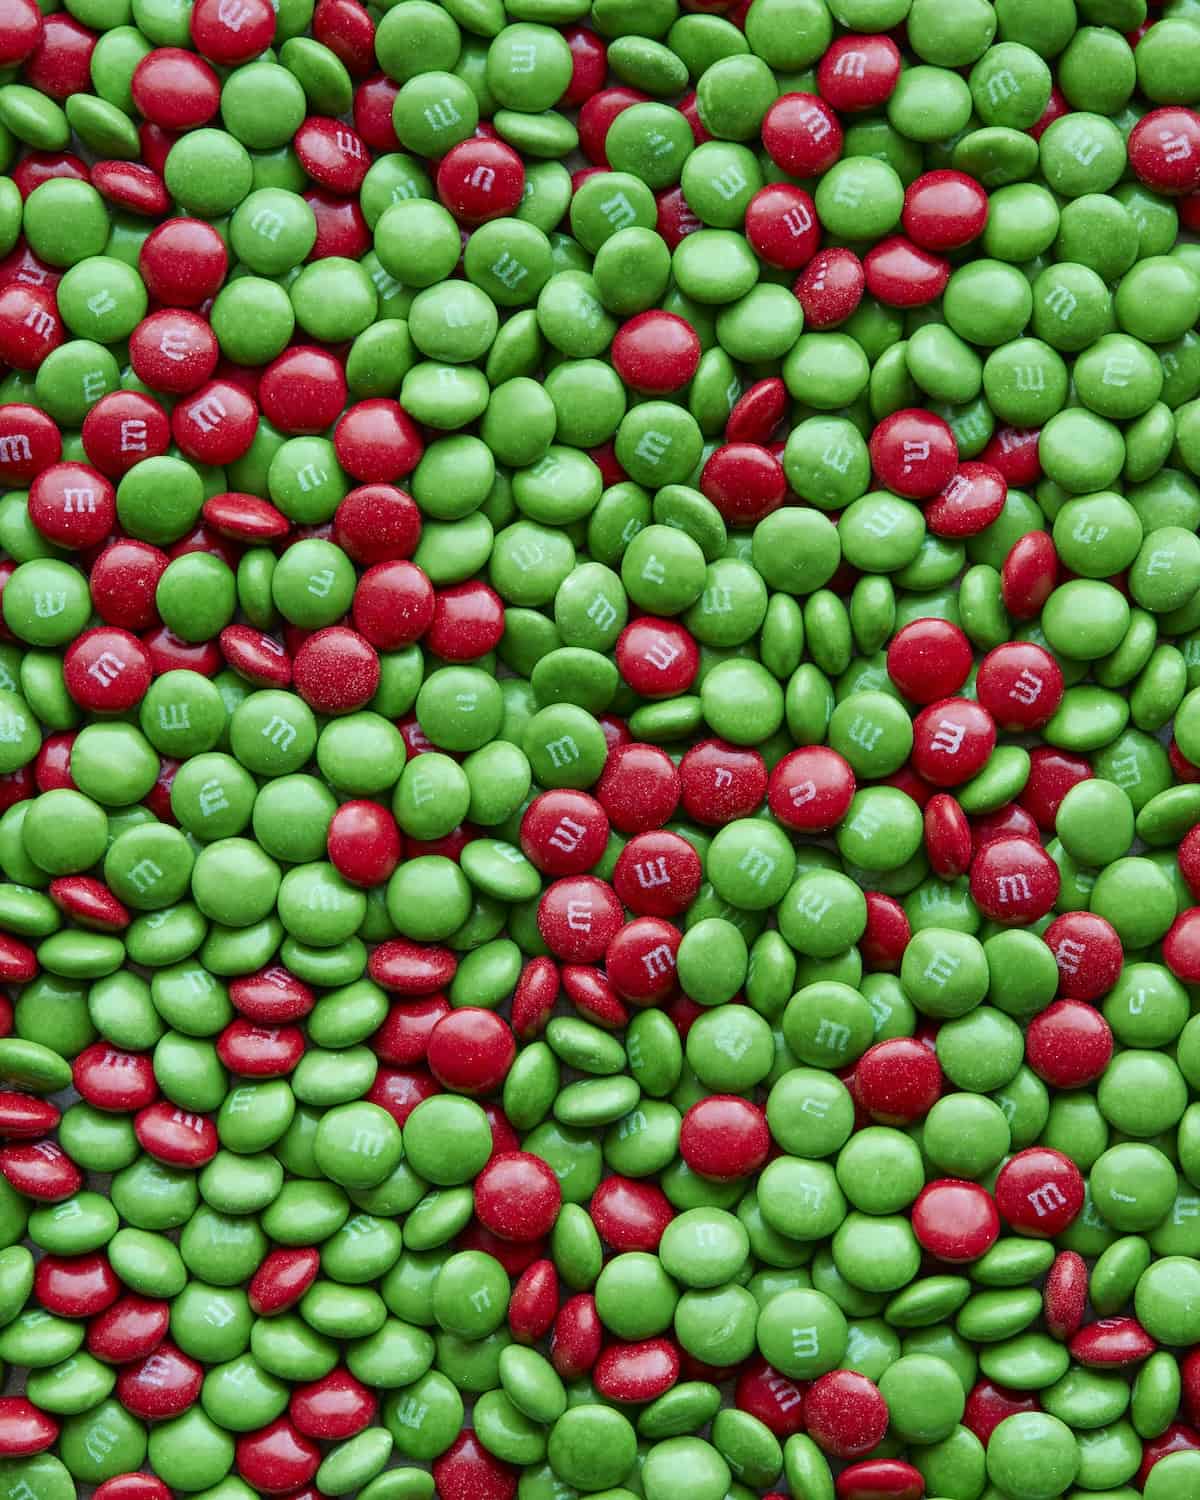 A close-up shot of a flat pile of red and green M&Ms mixed up together.